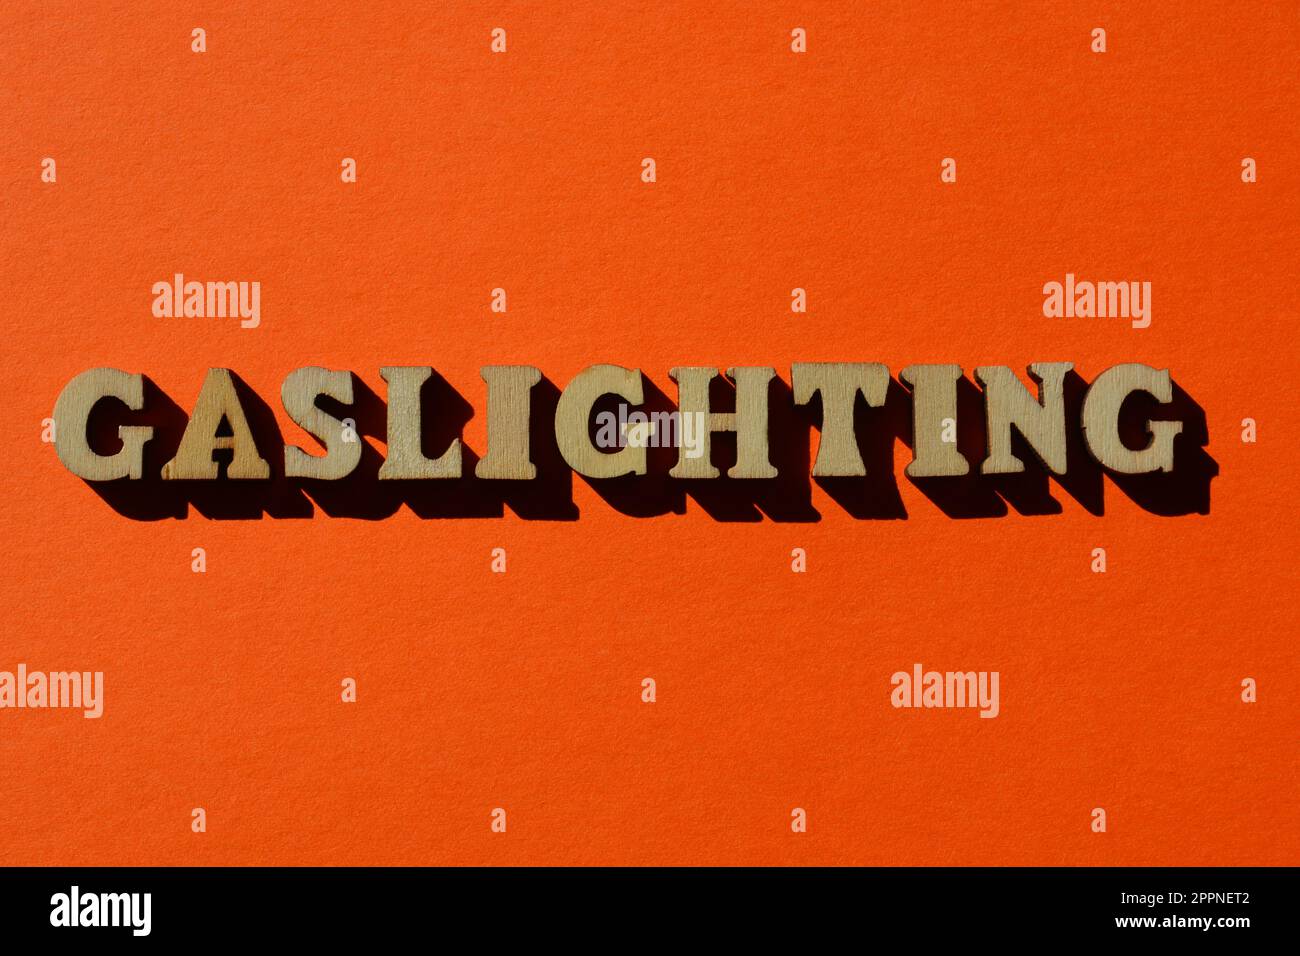 Gaslighting, word in wooden alphabet letters isolated on bright orange background Stock Photo